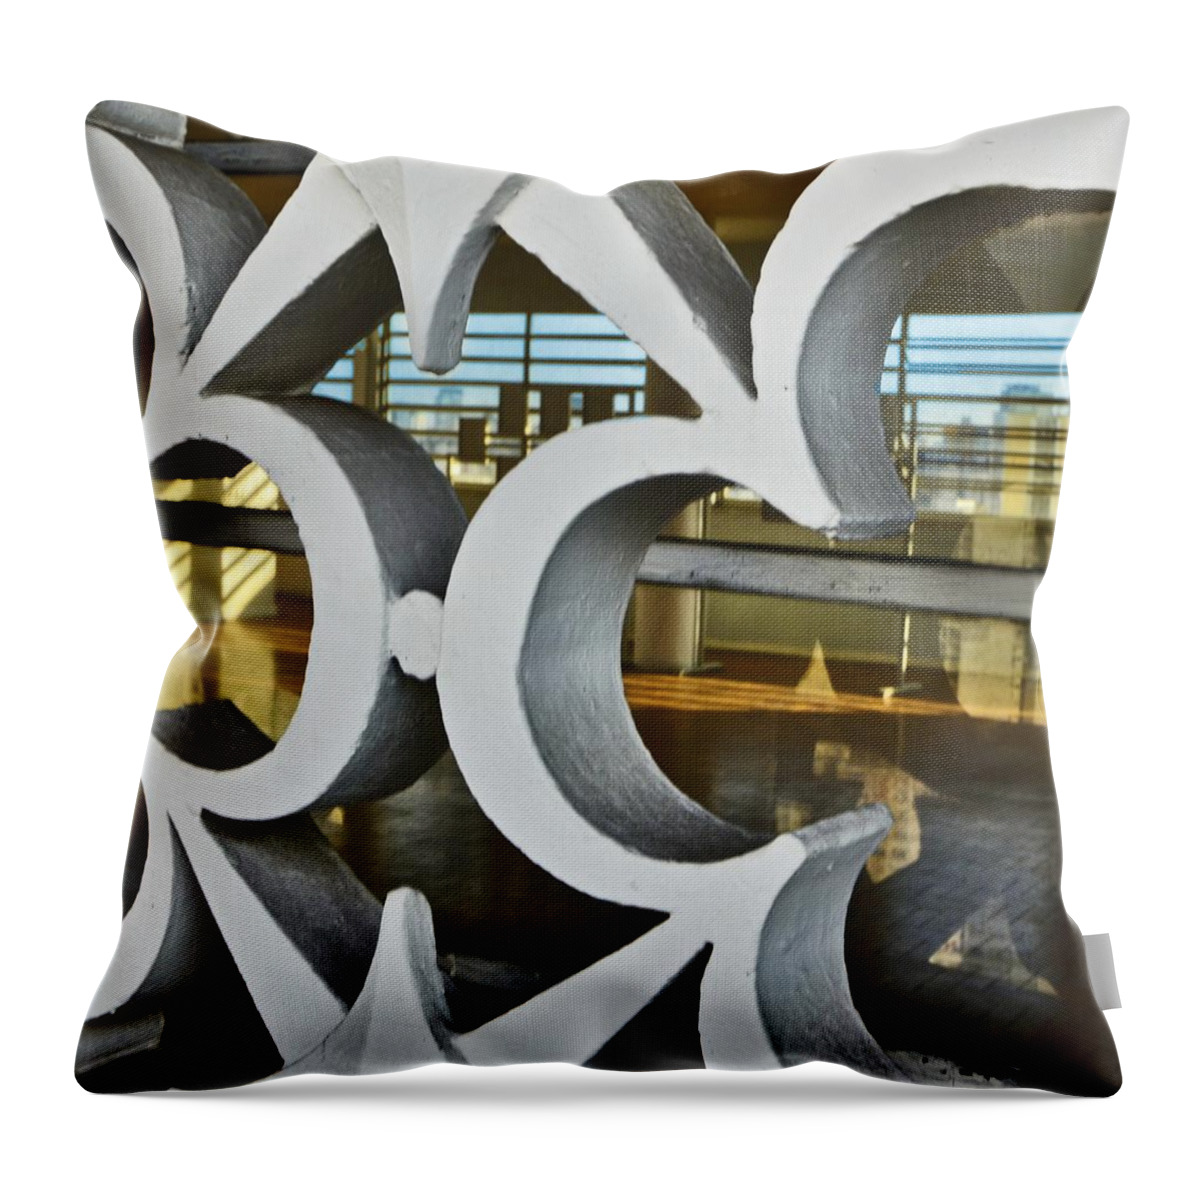 Saopaulo Throw Pillow featuring the photograph Kitsch Urban Details by Carlos Alkmin